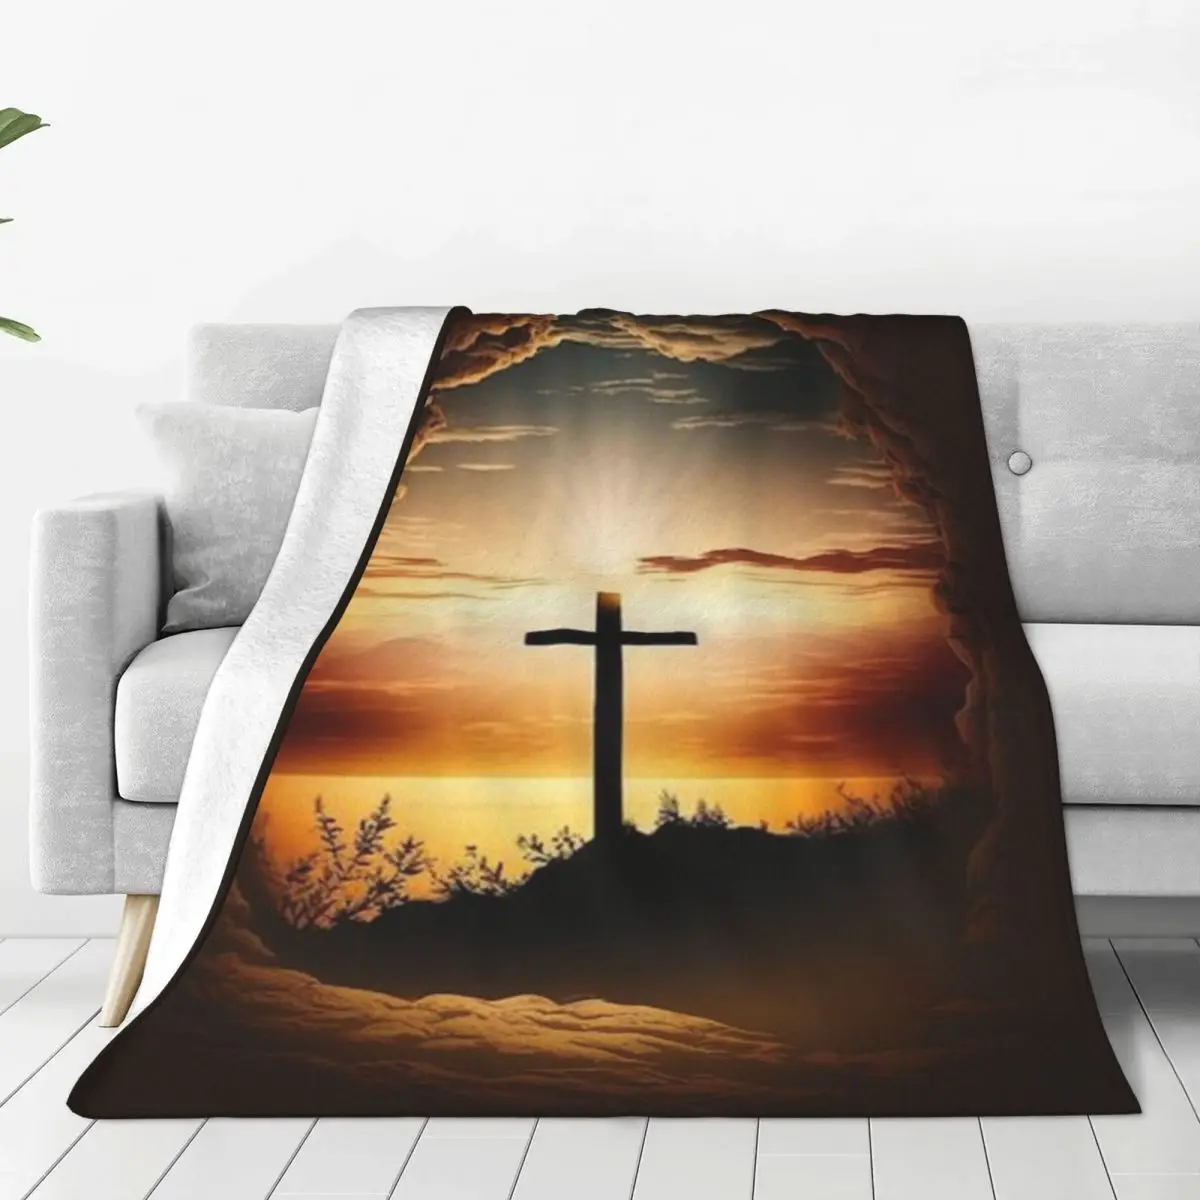 

Christian Cross Flannel Blanket Sunset Super Soft Bedding Throws for Living Room Camping Funny Bedspread Sofa Bed Cover